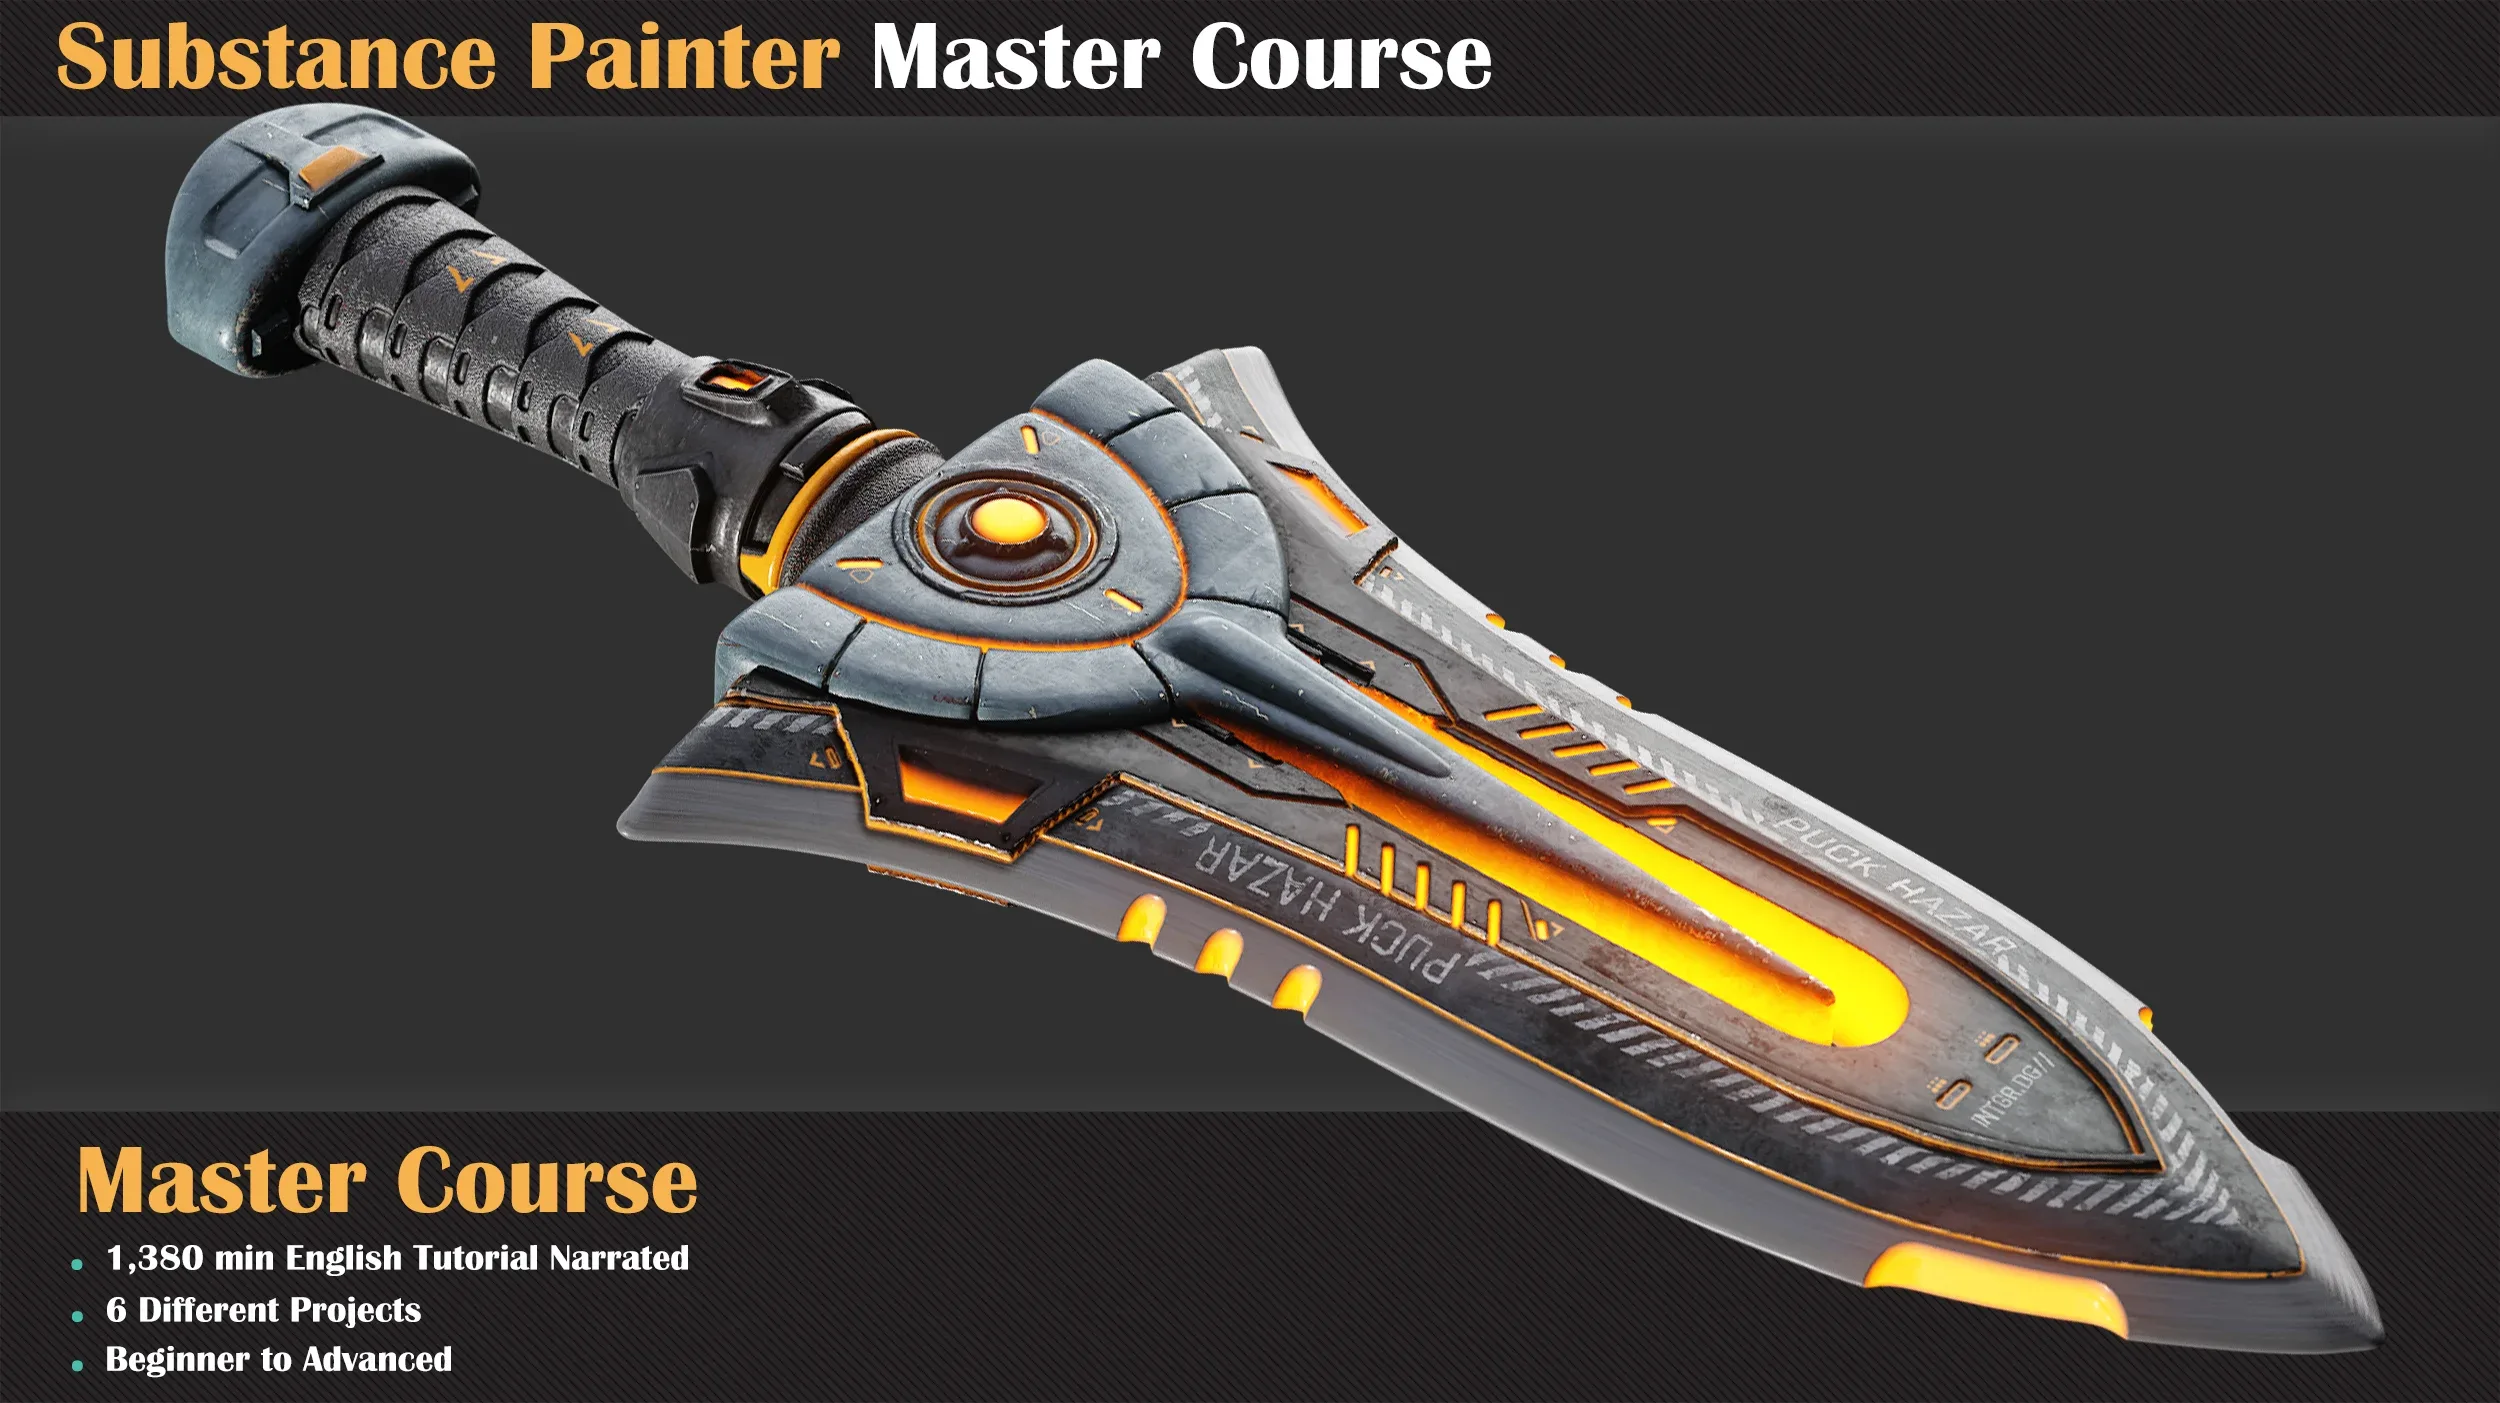 Substance Painter Master Course